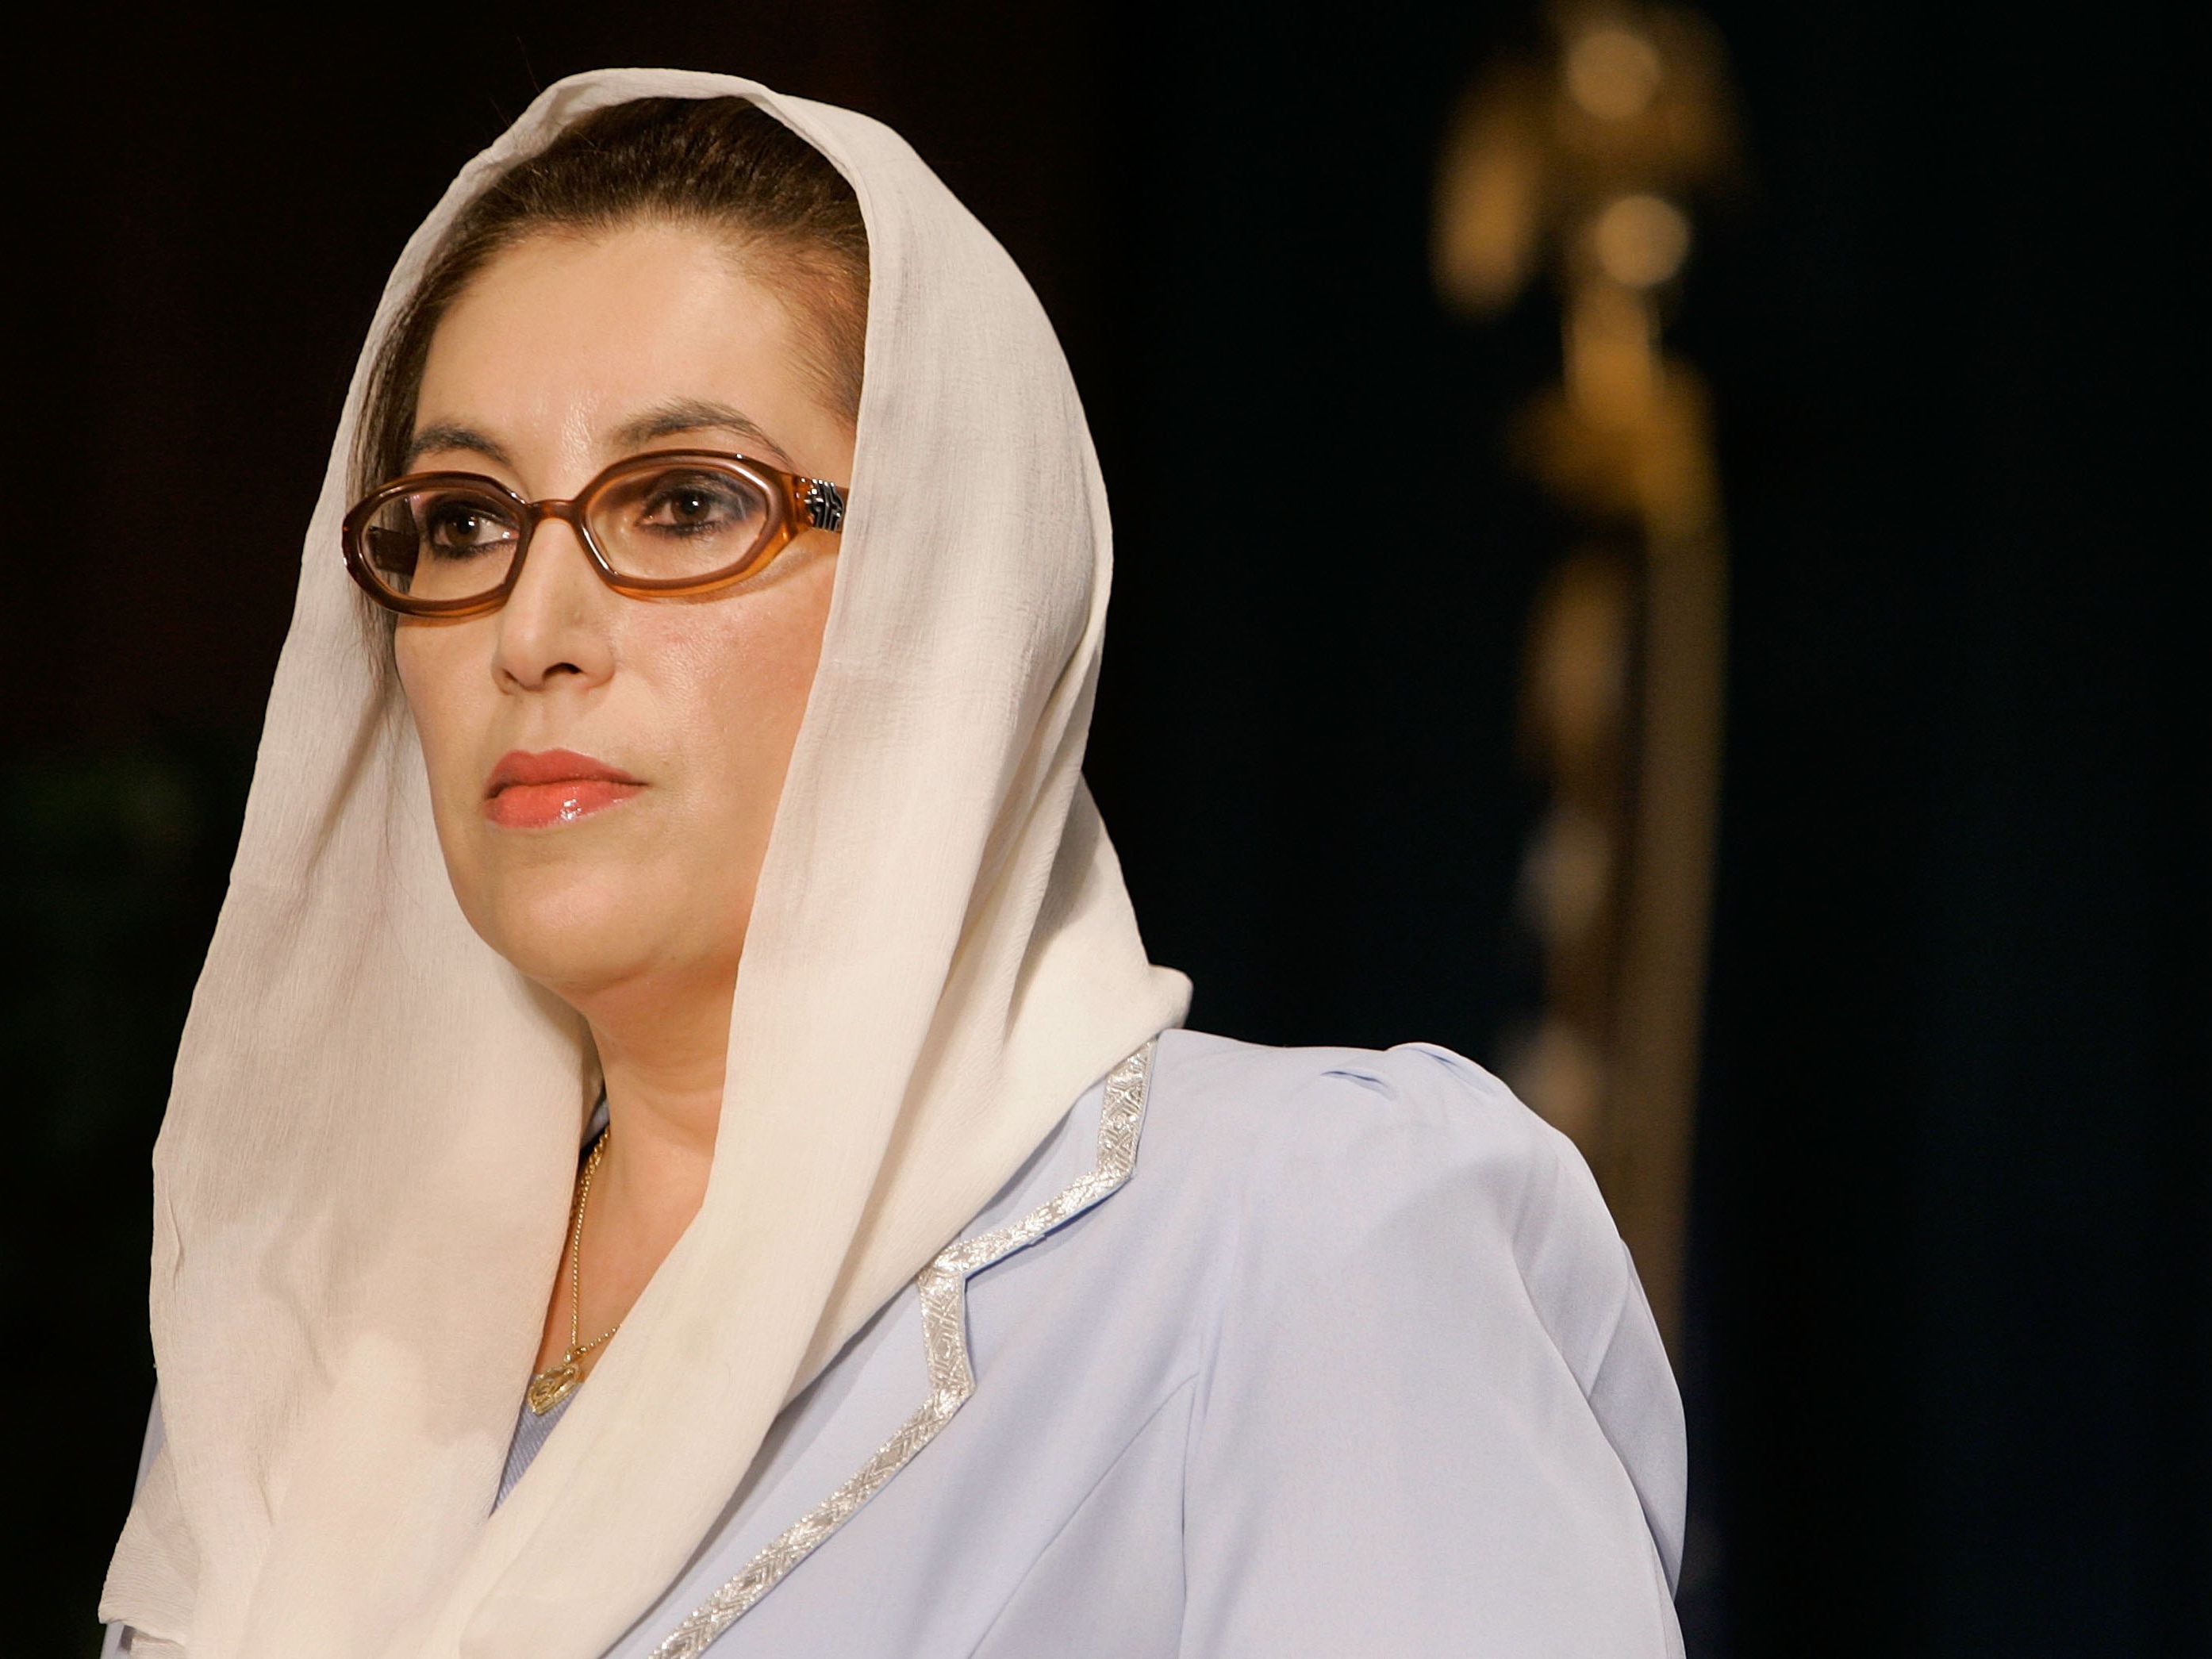 Benazir Bhutto Age, Assassination, Biography & More